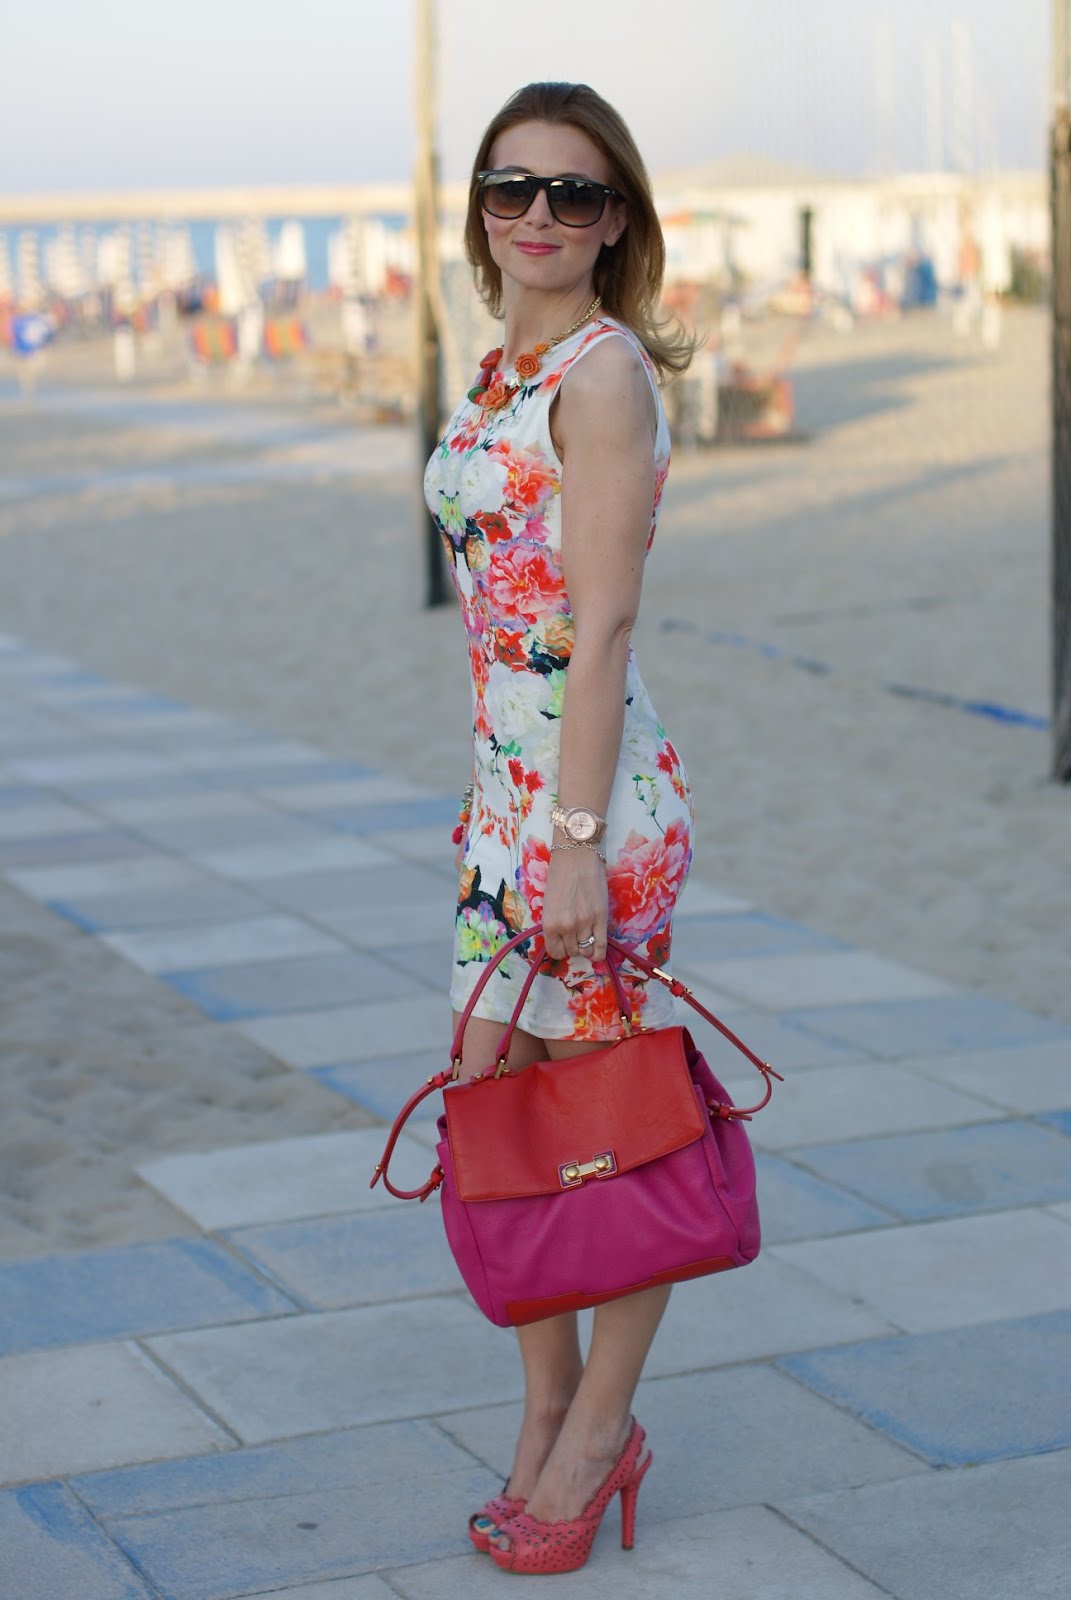 Tight floral dress | Fashion and Cookies - fashion and beauty blog